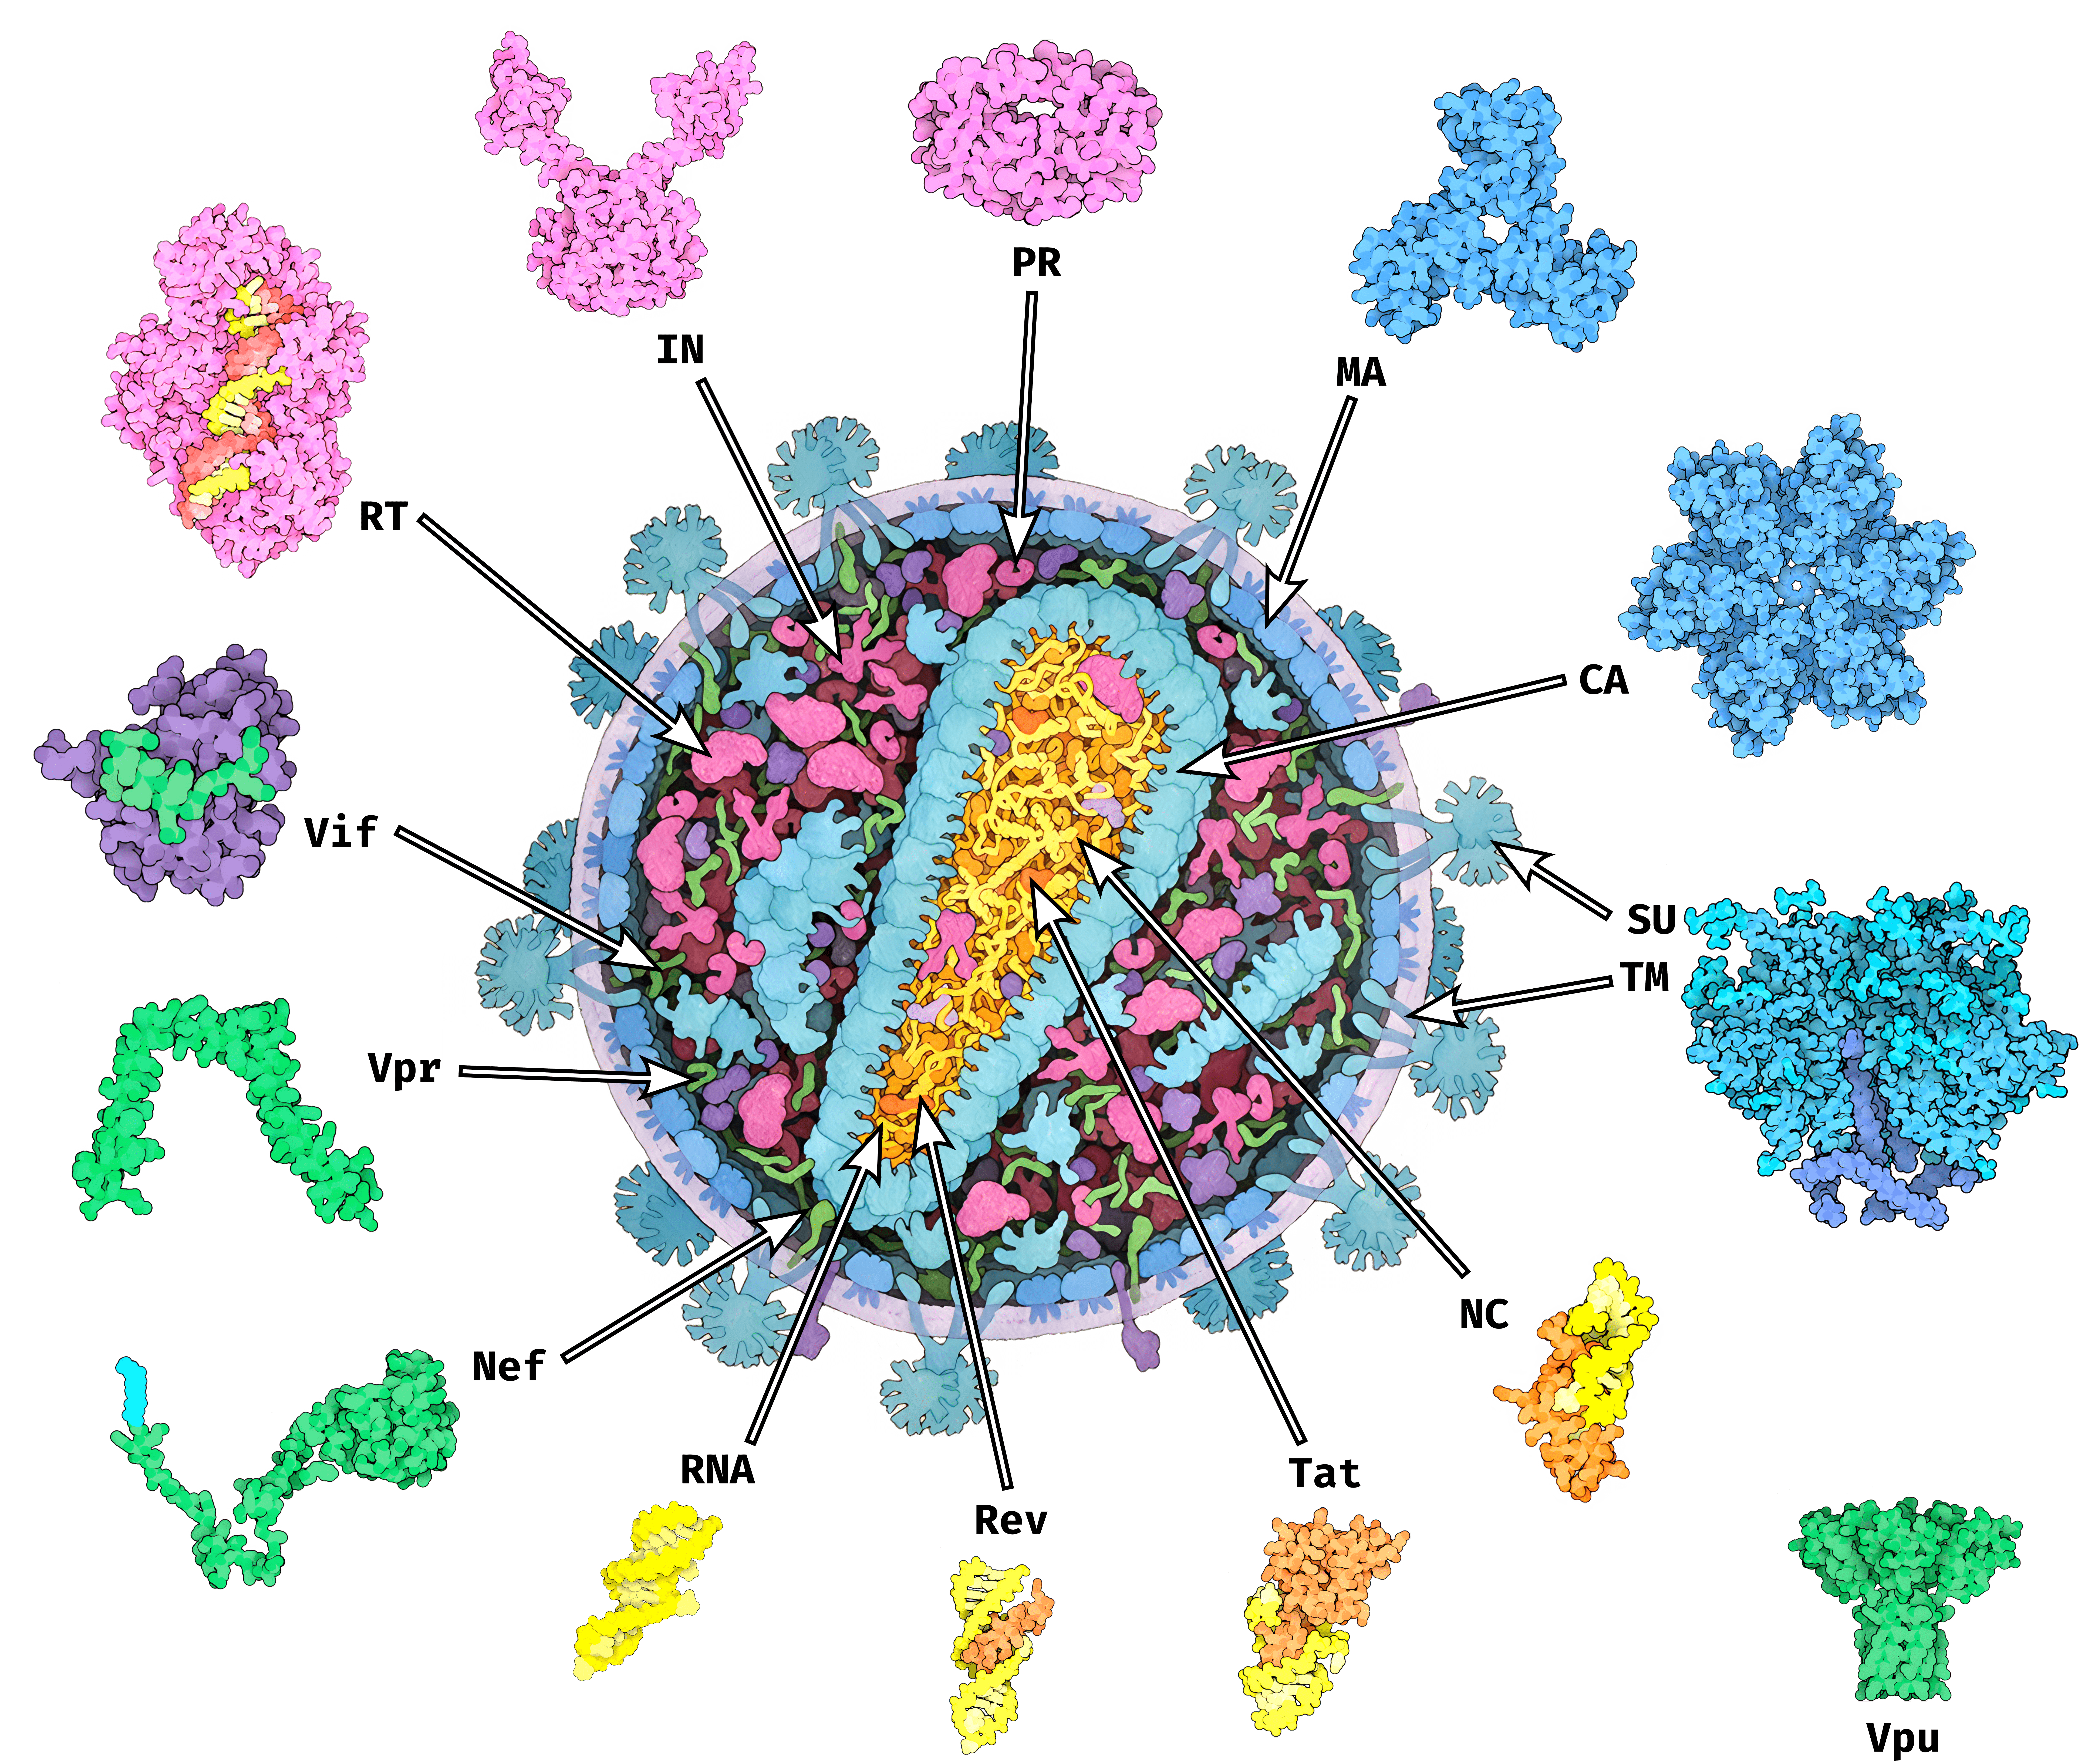 **Structure and main components of a mature HIV-1 virion.**  
Structural proteins MA, CA, SU and TM are represented in Blue, functional enzymes RT, IN and PR in pink, RNA binding proteins Rev, Tat and NC in orange and accessory proteins Vif, Nef, Vpr and Vpu in green. Viral RNA is shown in yellow. The phospholipd membrane of the virion is shown in a light purple color. The p6 protein is not represented as it is largely unsctructured. Vpu is not believed to be present in the HIV virion.  
Figure adapted from PDB101 [@zardeckiPDB101EducationalResources2022] ([PDB101.rcsb.org](https://PDB101.rcsb.org), *CC By 4.0 License*, detailed list of structures used available in Appendix \@ref(HIV-intro-appendix)).